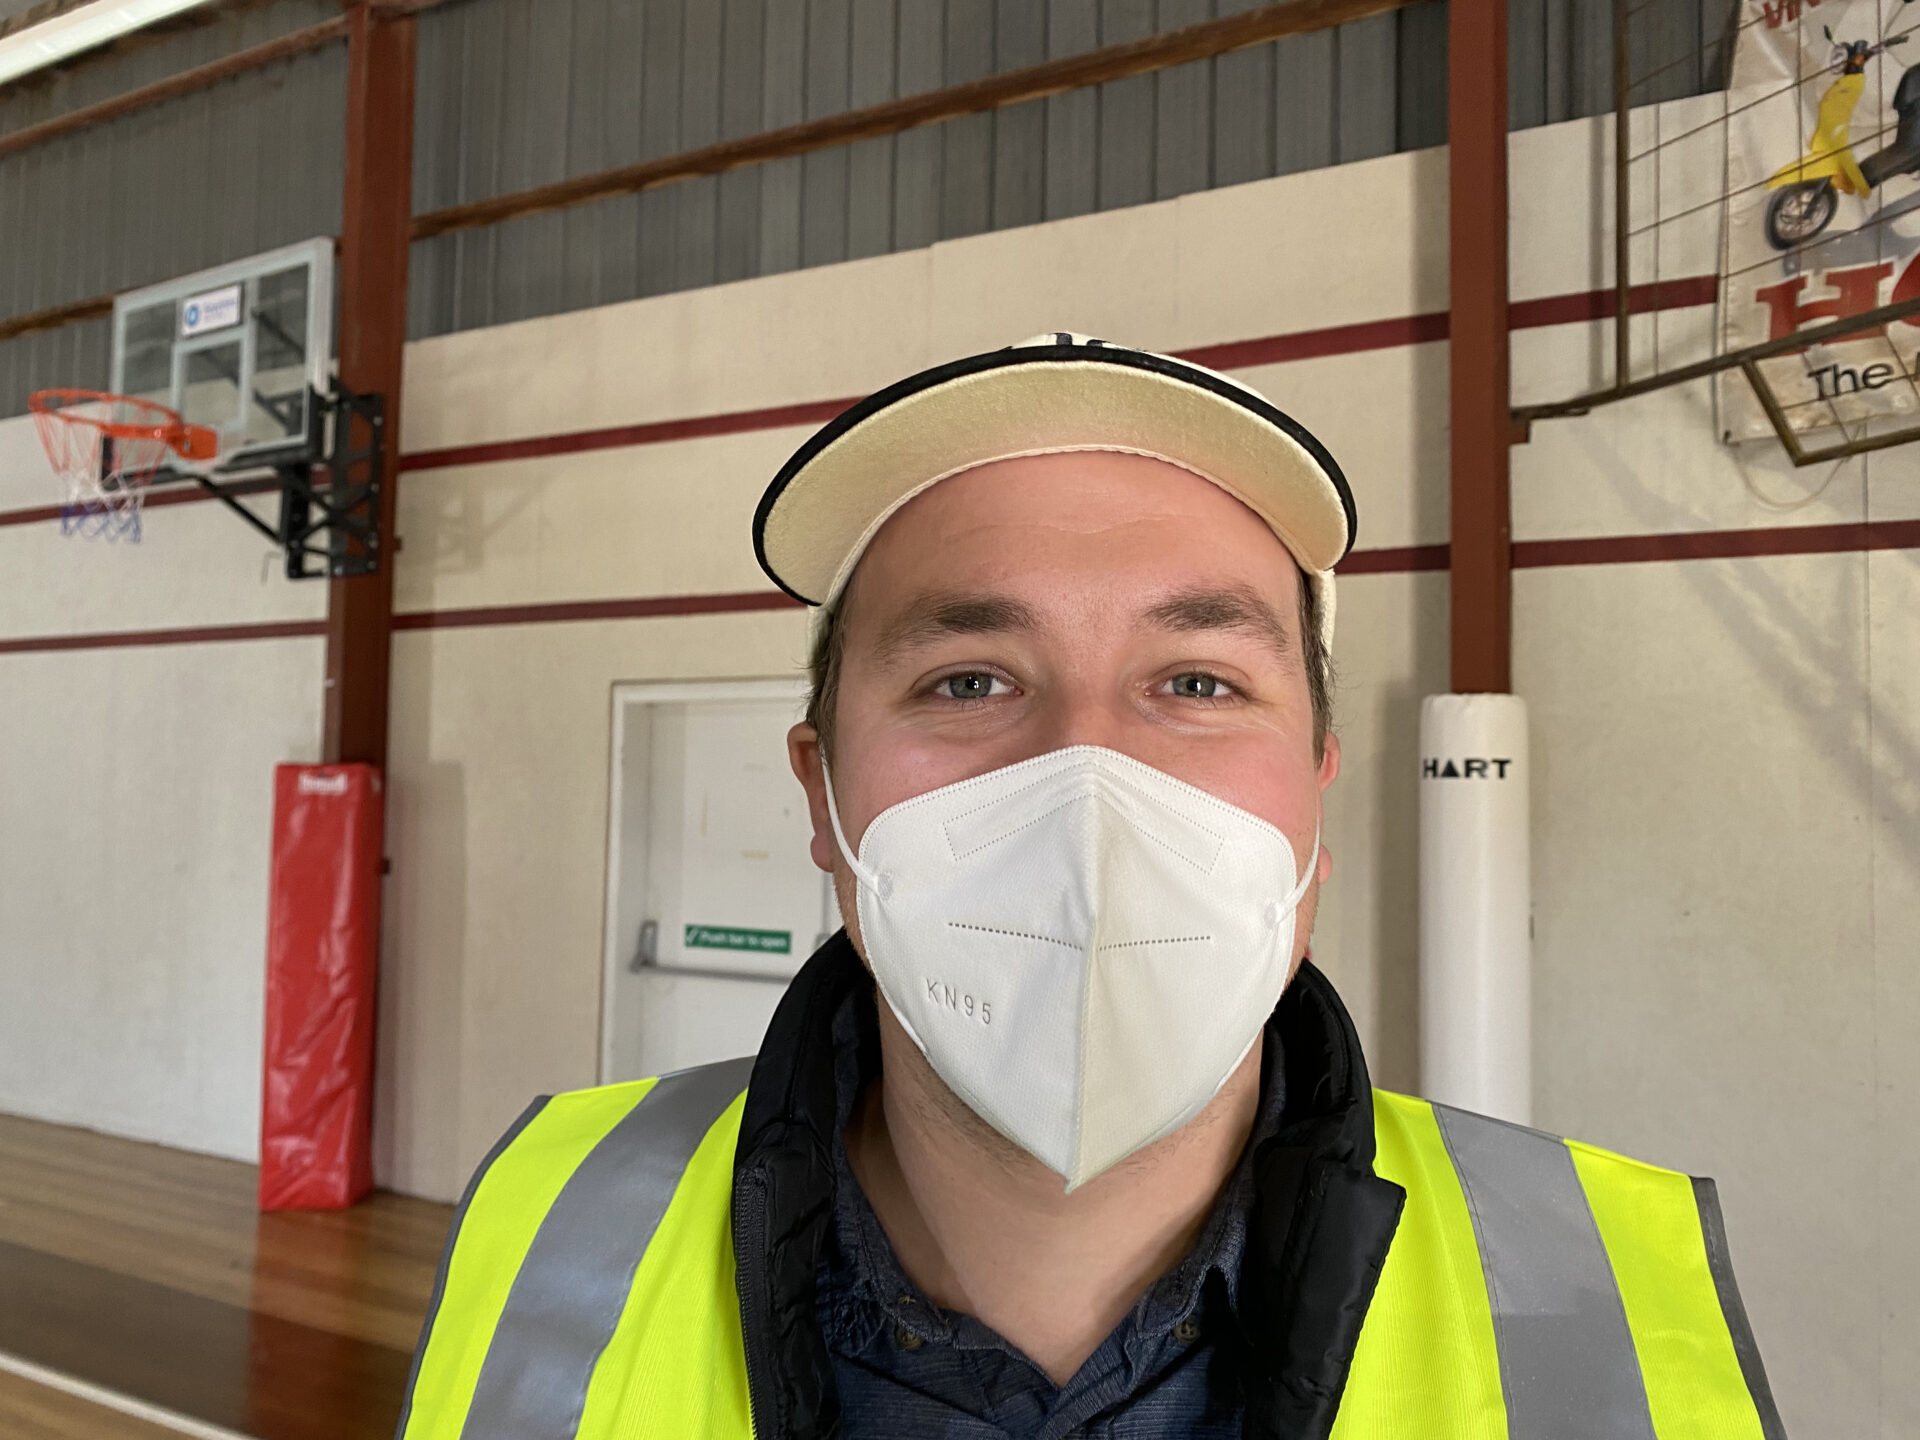 Chris folder wear a high-vis vest with a mask on presumably smiling at the camera